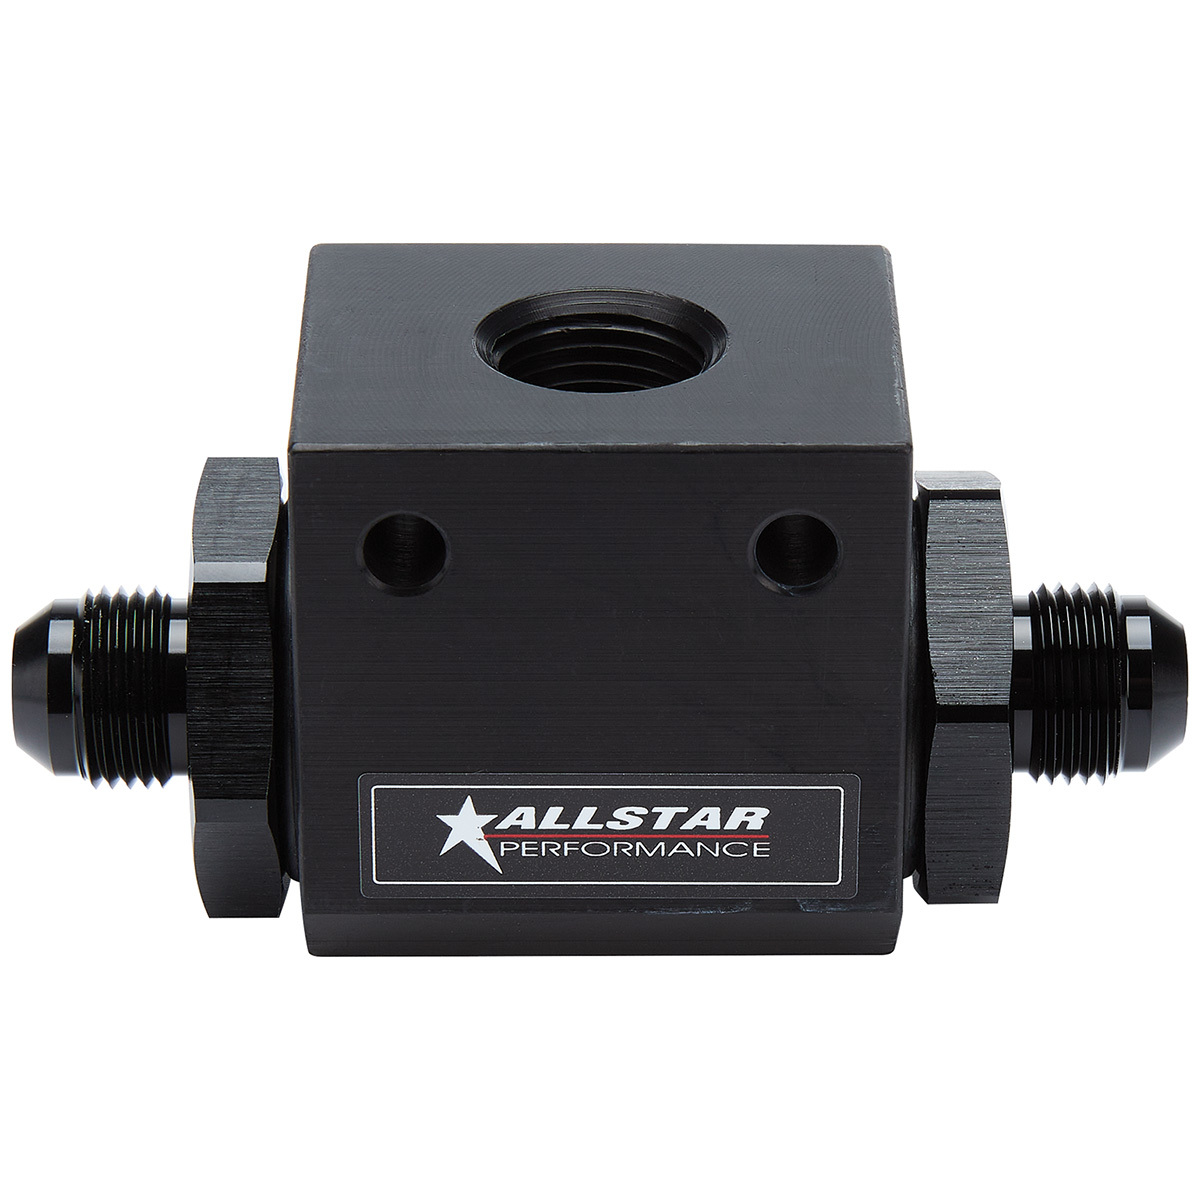 Allstar Performance 90039 Temperature Manifold, 8 AN Male Inlet, 8 AN Male Outlet, 1/2 in NPT Female Port, 1/4 in Mounting Holes, Aluminum, Black Anodized, Each